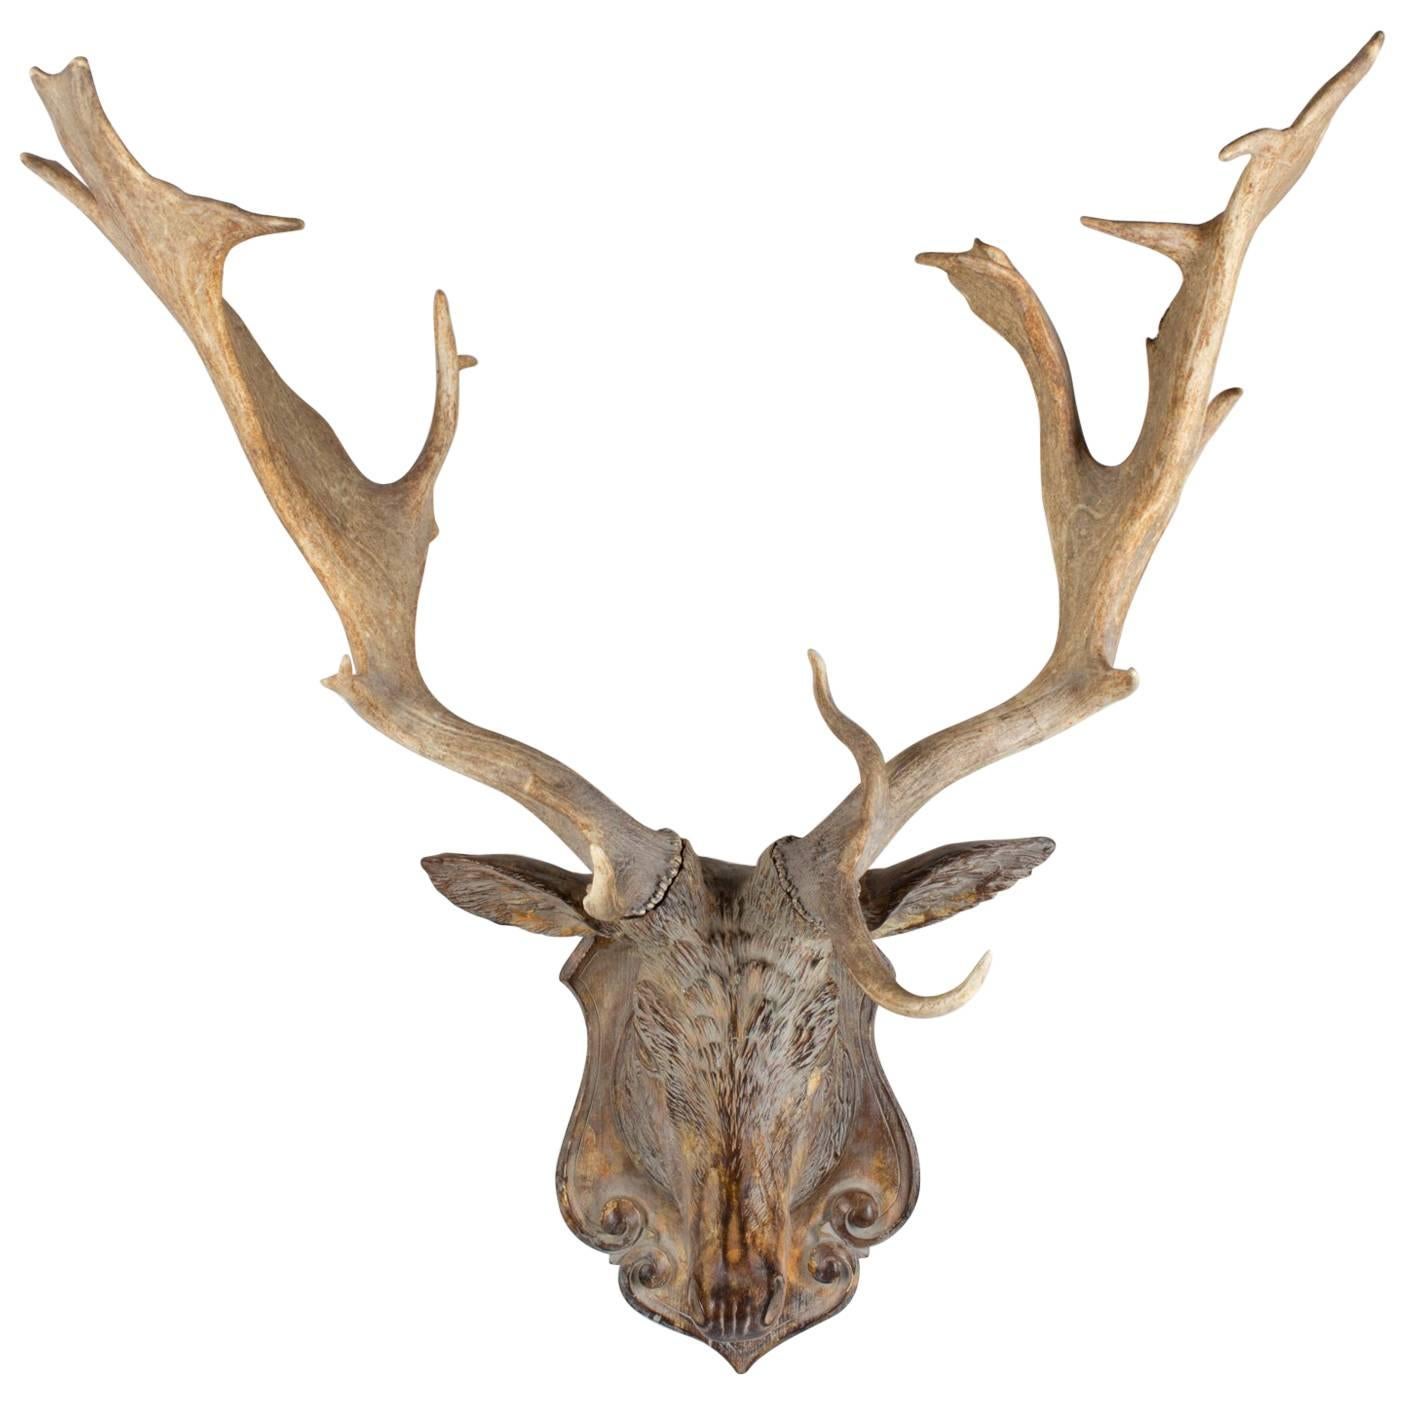 Terracotta Fallow Deer Trophy with Antique Habsburg Antlers from Austria